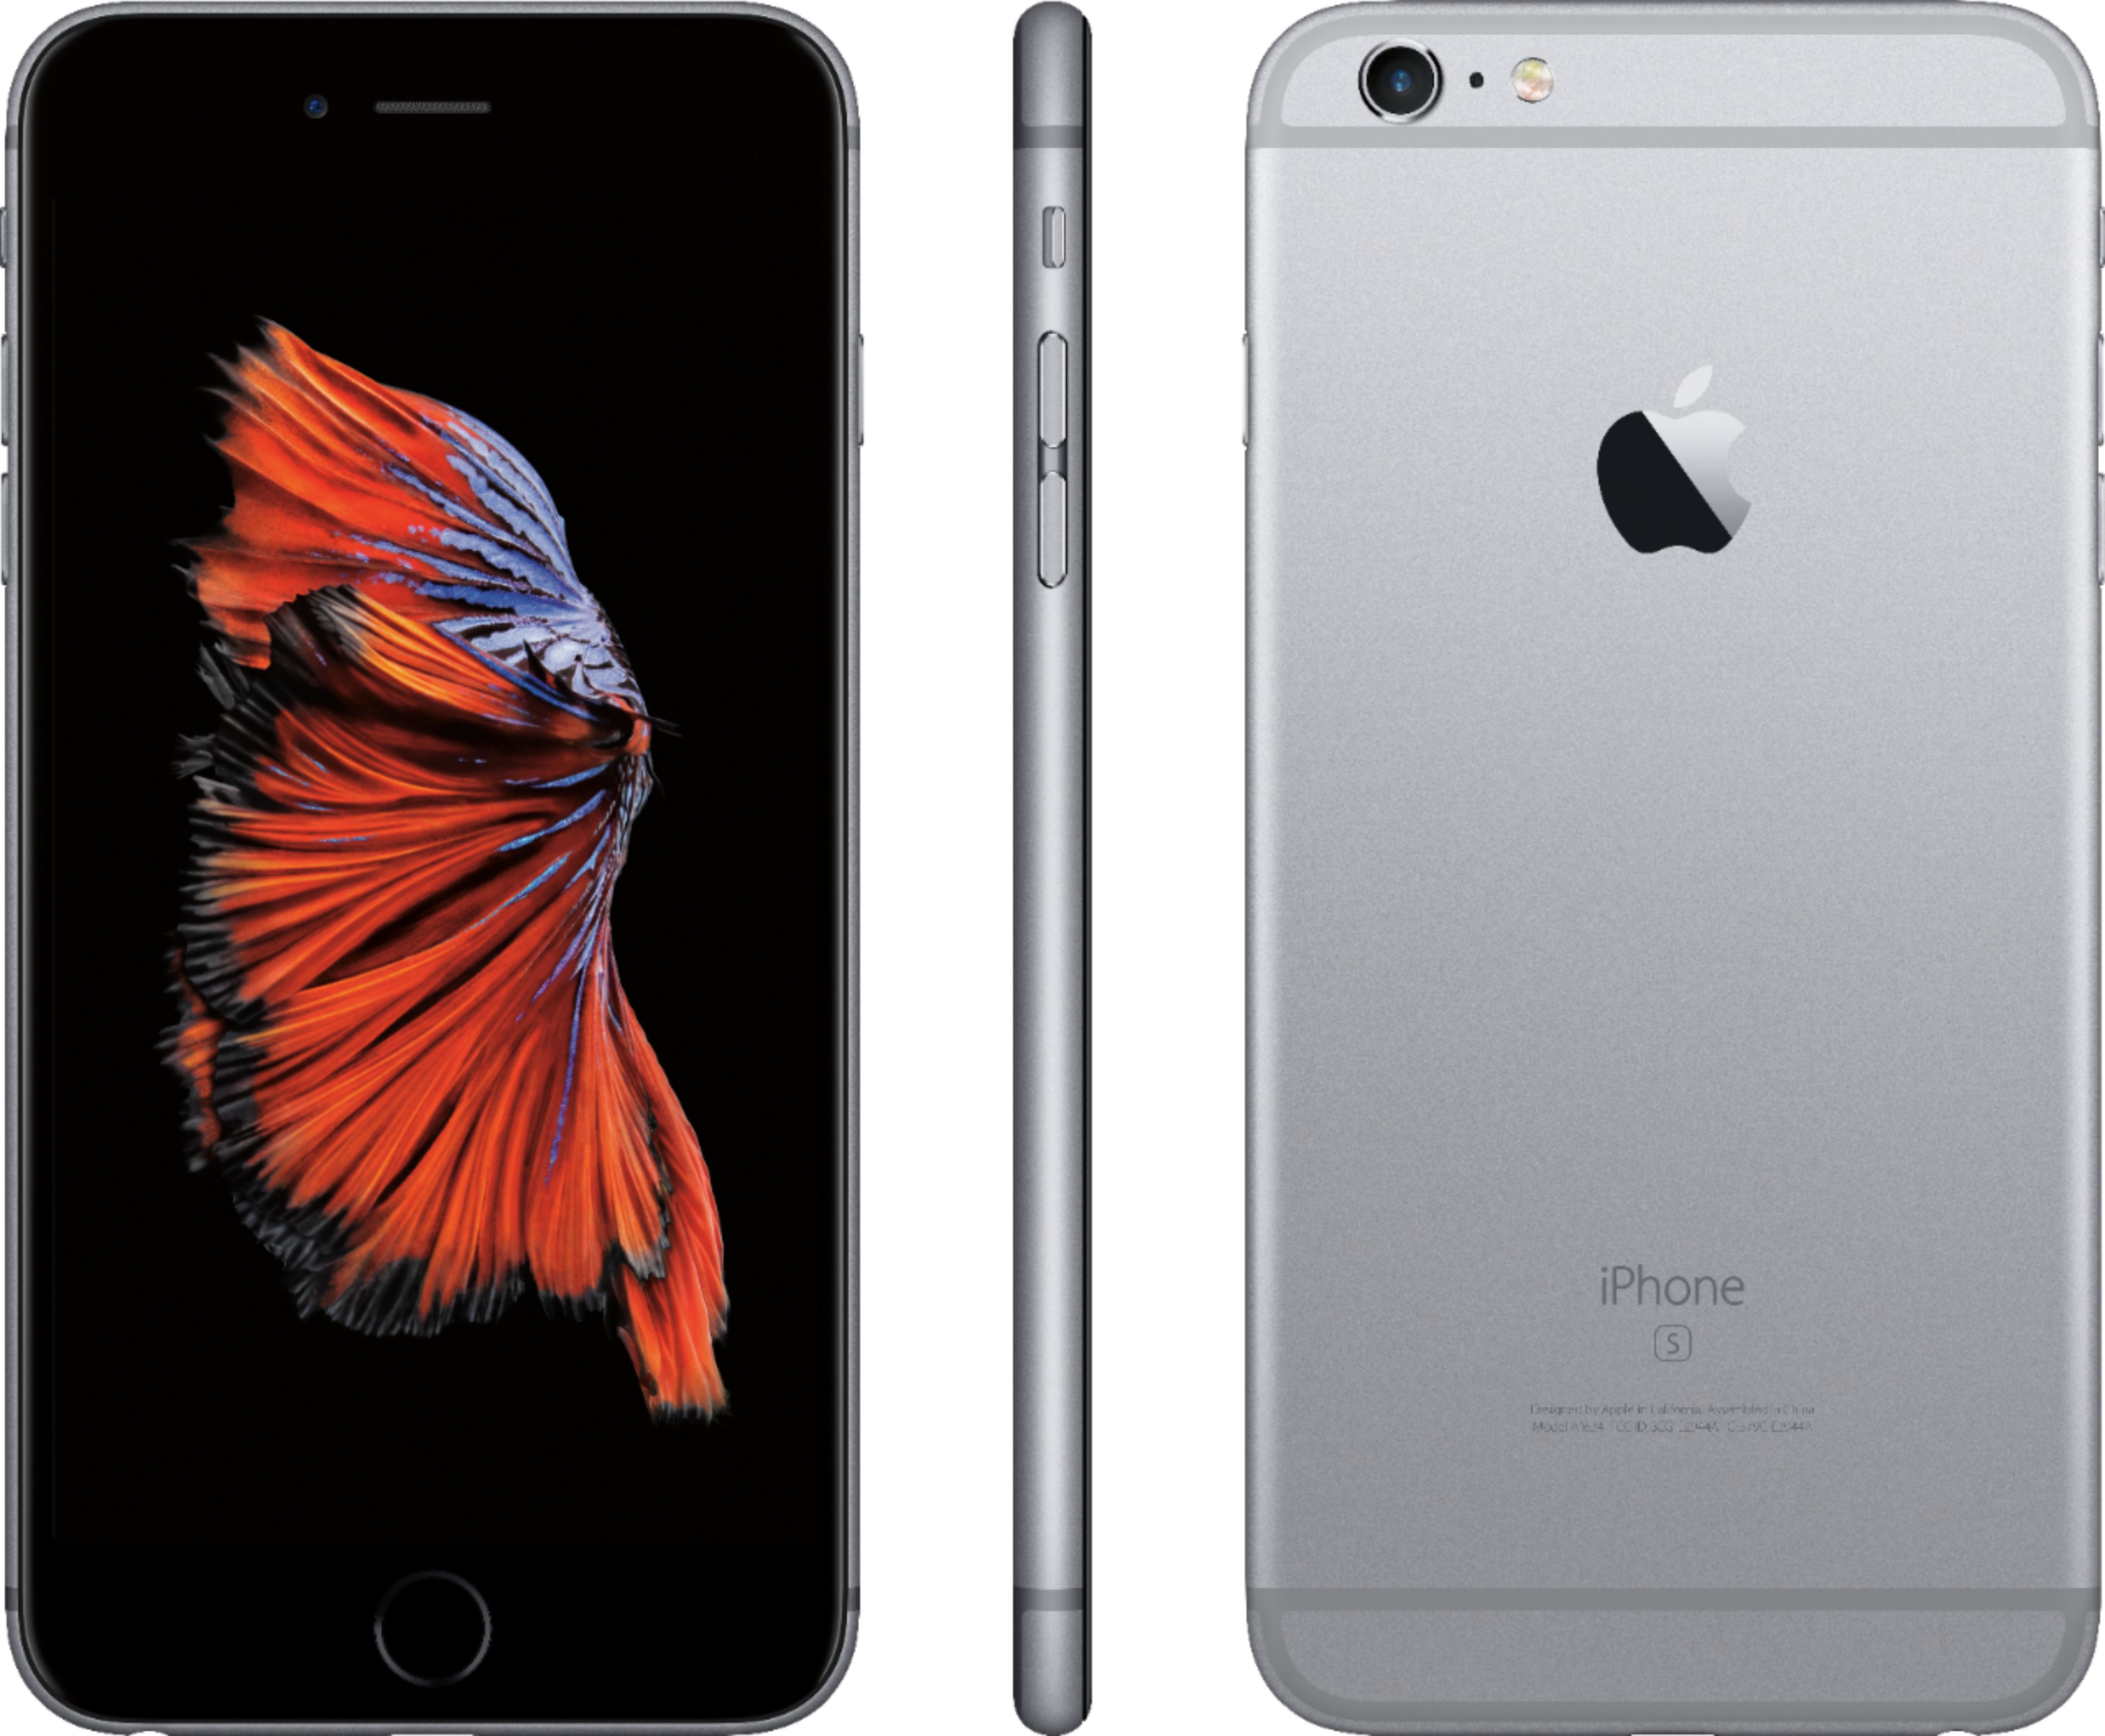 Customer Reviews: Apple iPhone 6s Plus 32GB (Sprint) MN342LL/A - Best Buy